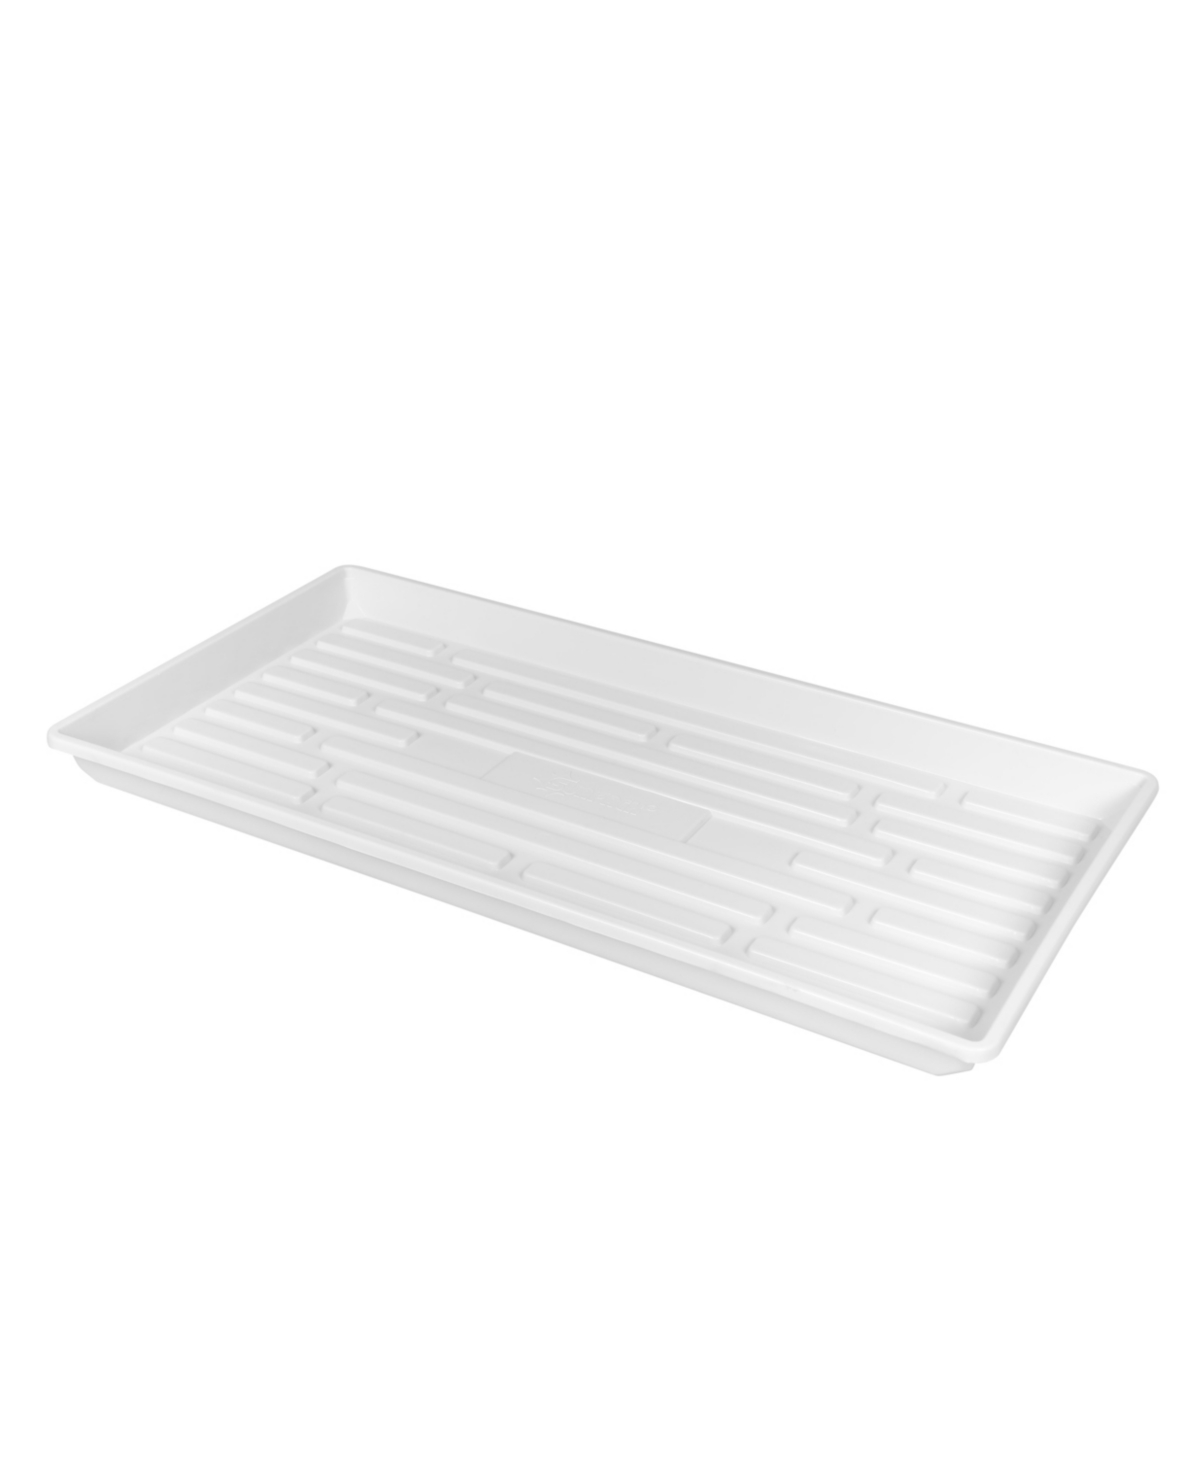 10 x 20in Indoor Gardening Shallow No Holes Seeding Tray, 1in - White